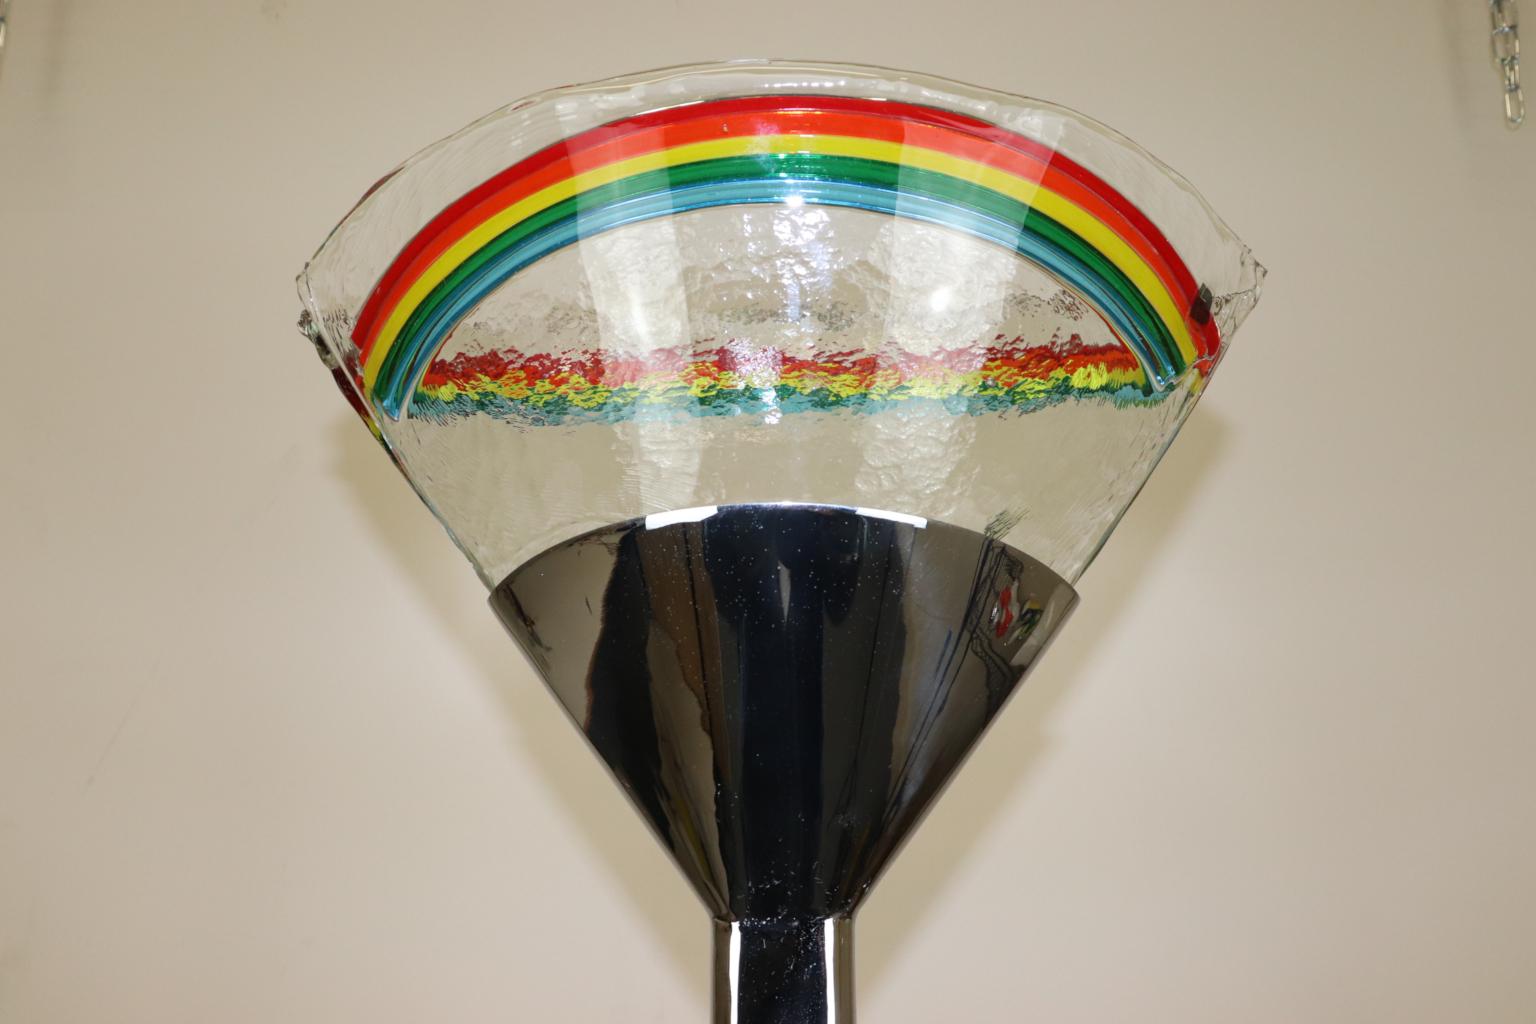 Italian Mauro Marzollo for ITRE Floor Lamp Chrome Stem Murano Glass with Rainbow For Sale